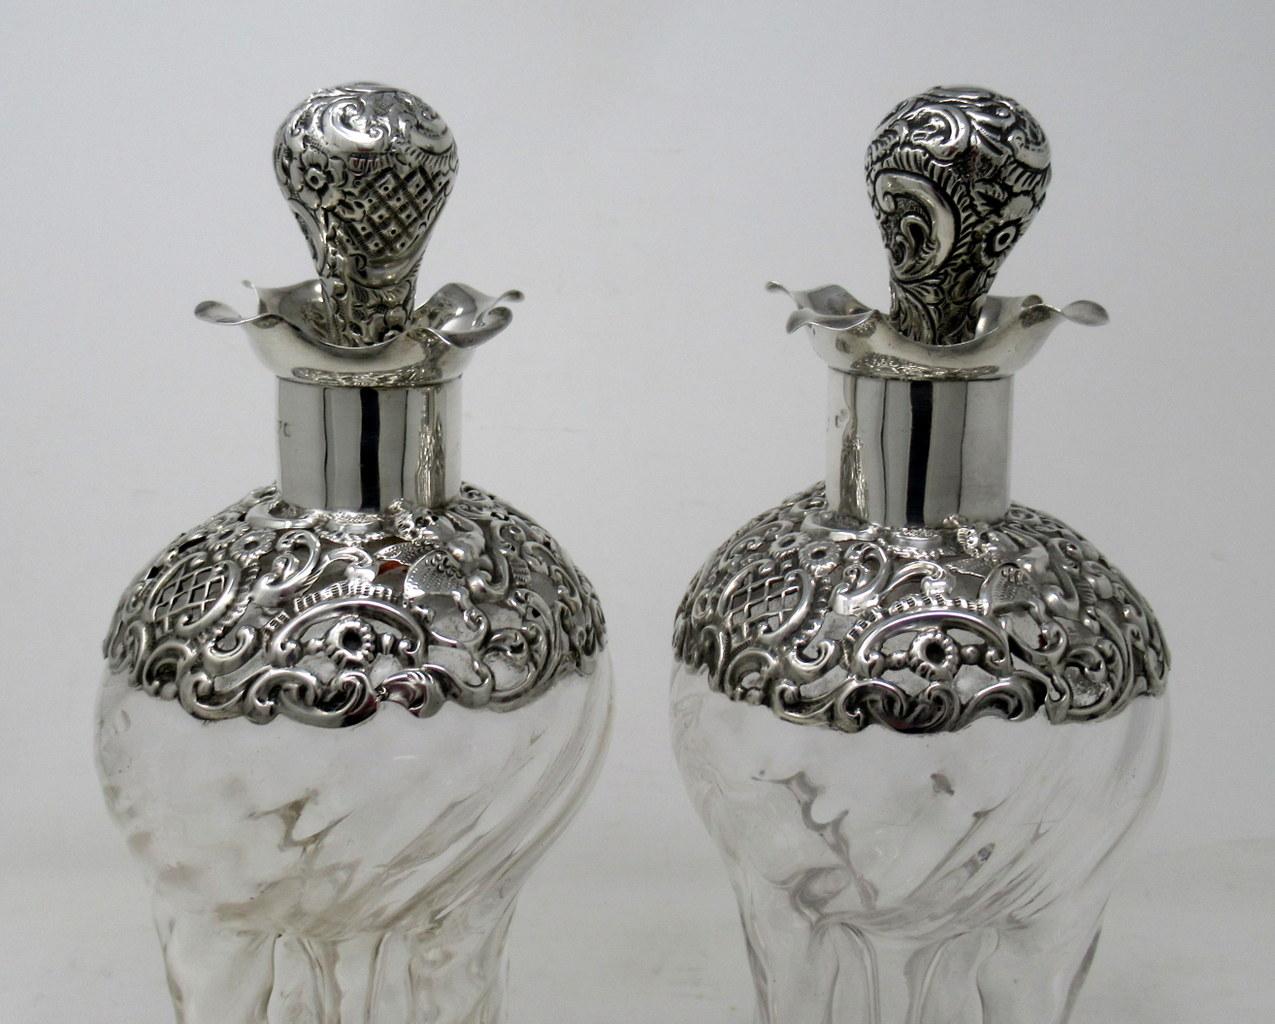 Pair of Full Lead Crystal Hallmark Sterling Silver Spirits Wine Decanters, 1899 2